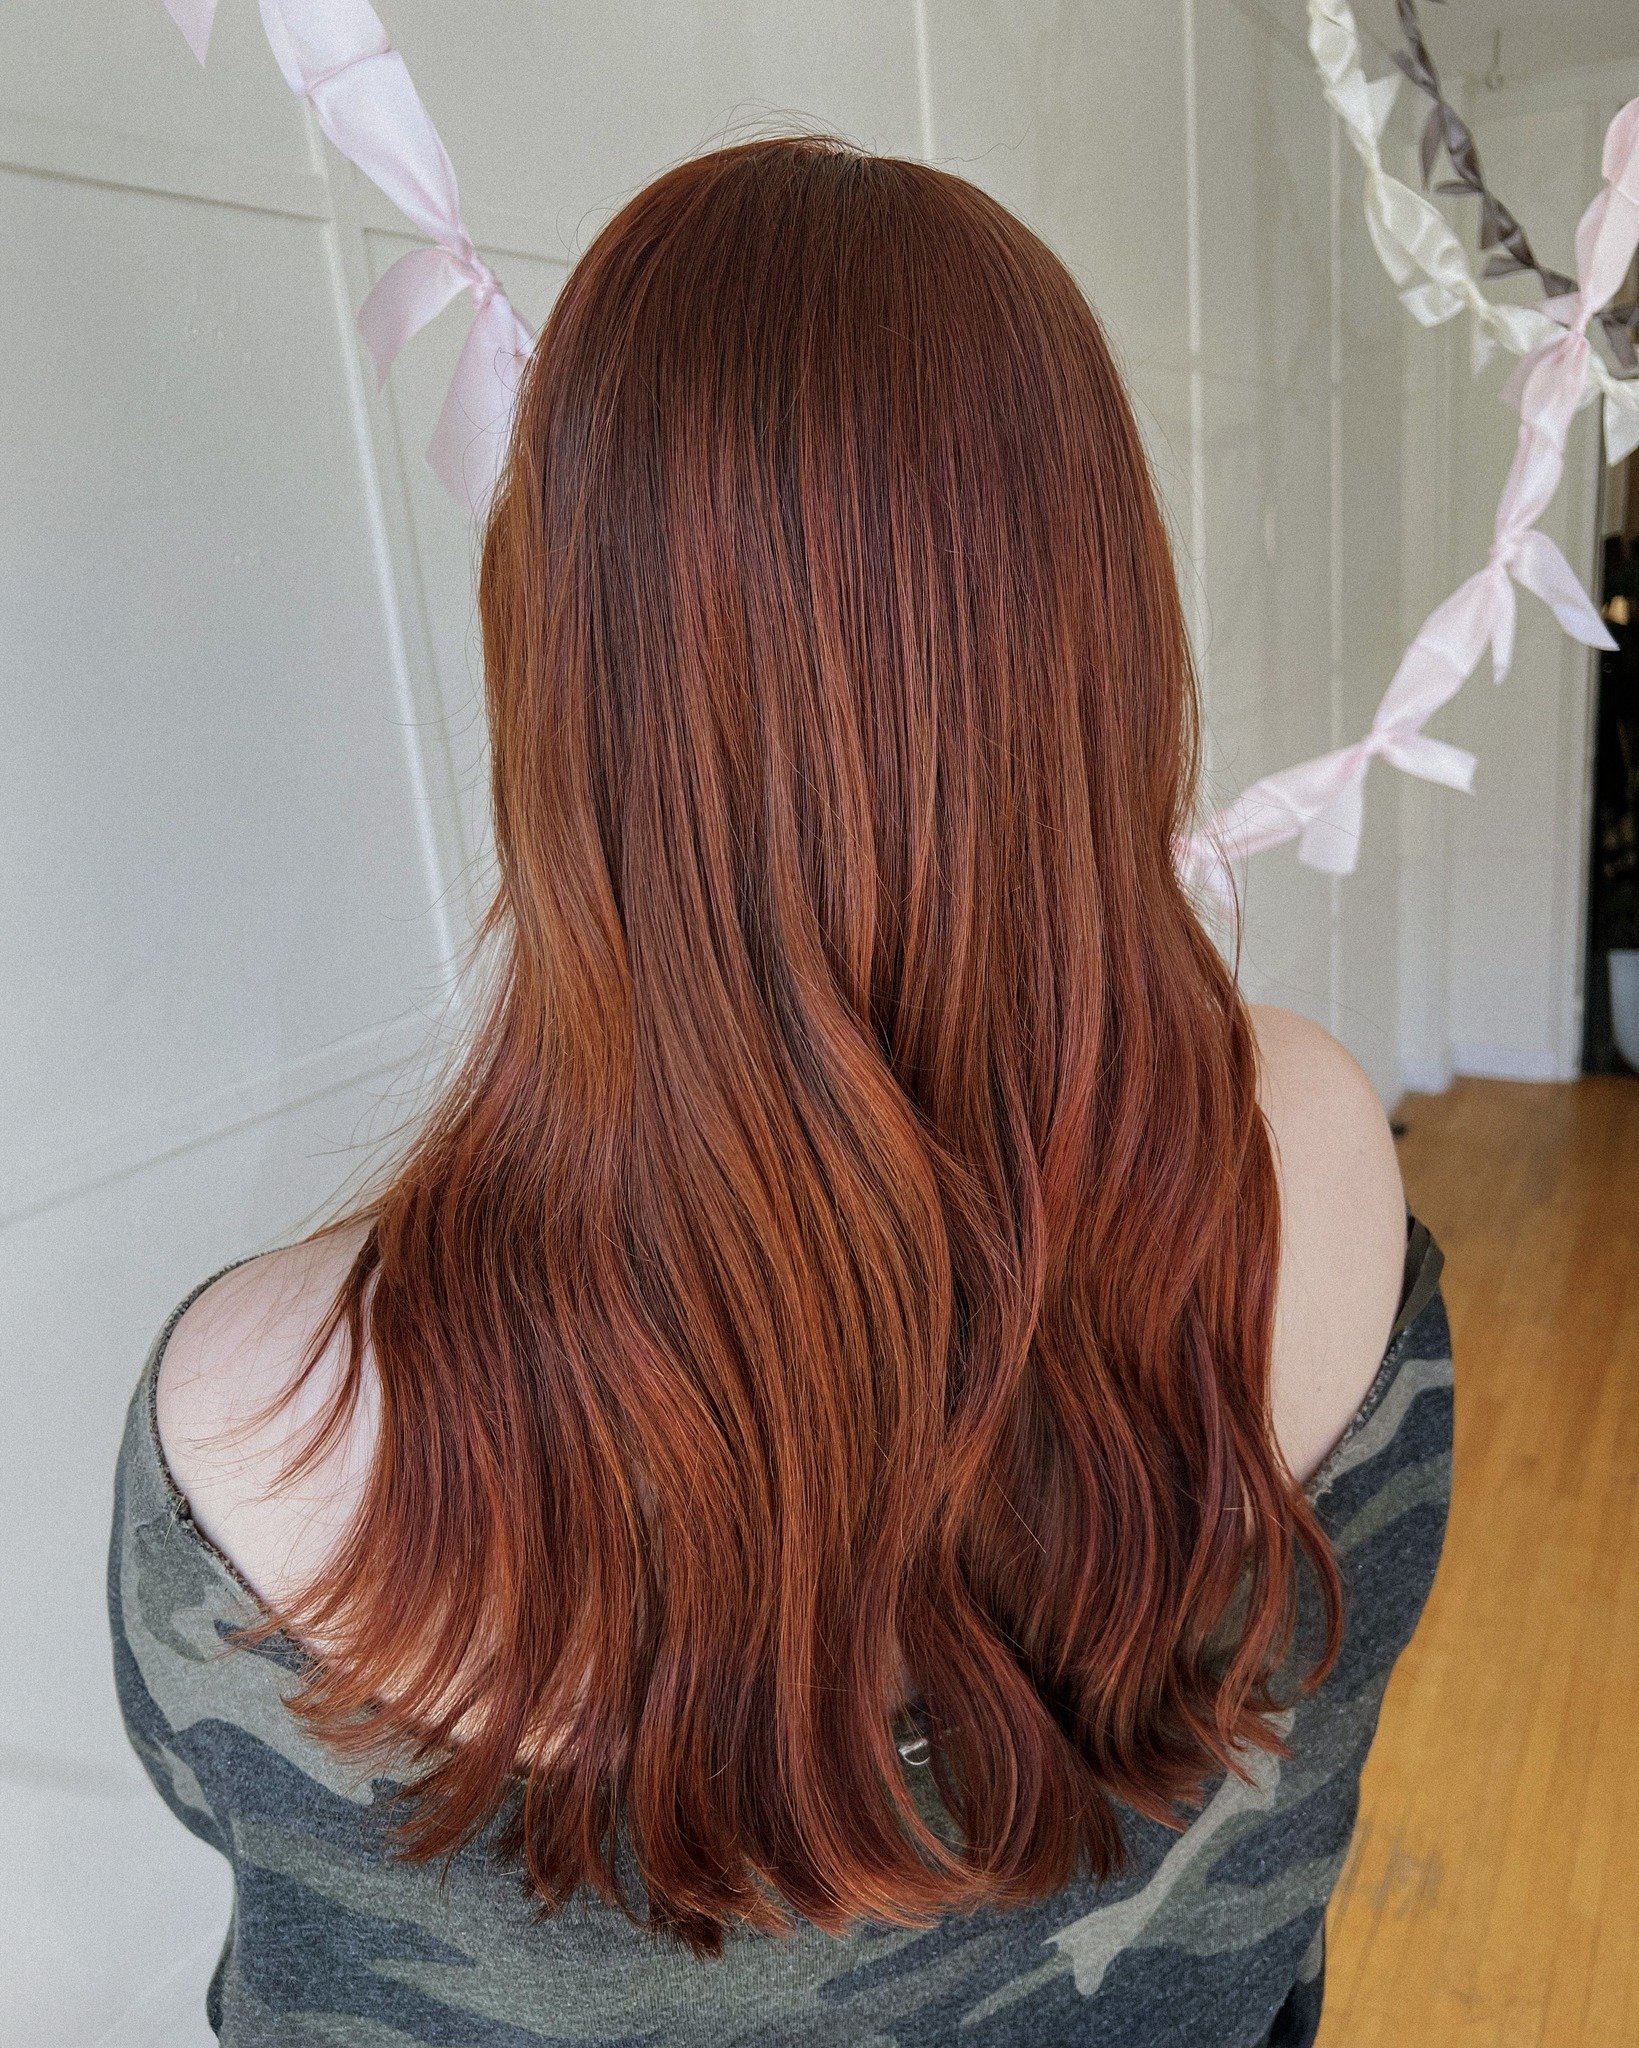 🌹🍒🔥❤️

for tayler by mads

base 20g 6,44 10g 6,46 10g 7,34 
ends 7,4 7,34

#coppercowgirl #copperhaircolor #davinesview #hihoneysalon #bismarcknd